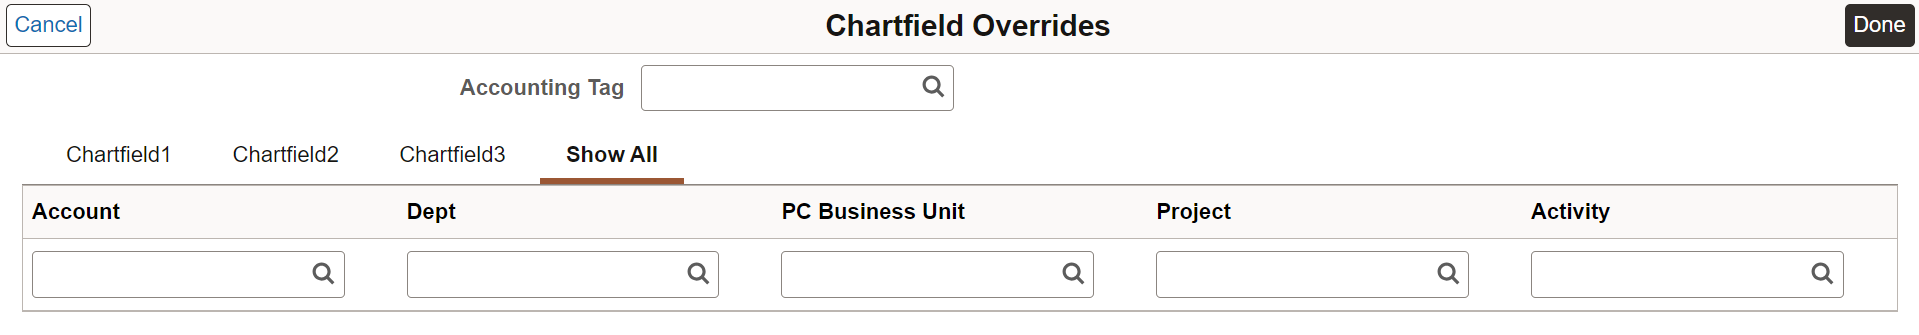 Express Issue - Chartfield Overrides Show All tab